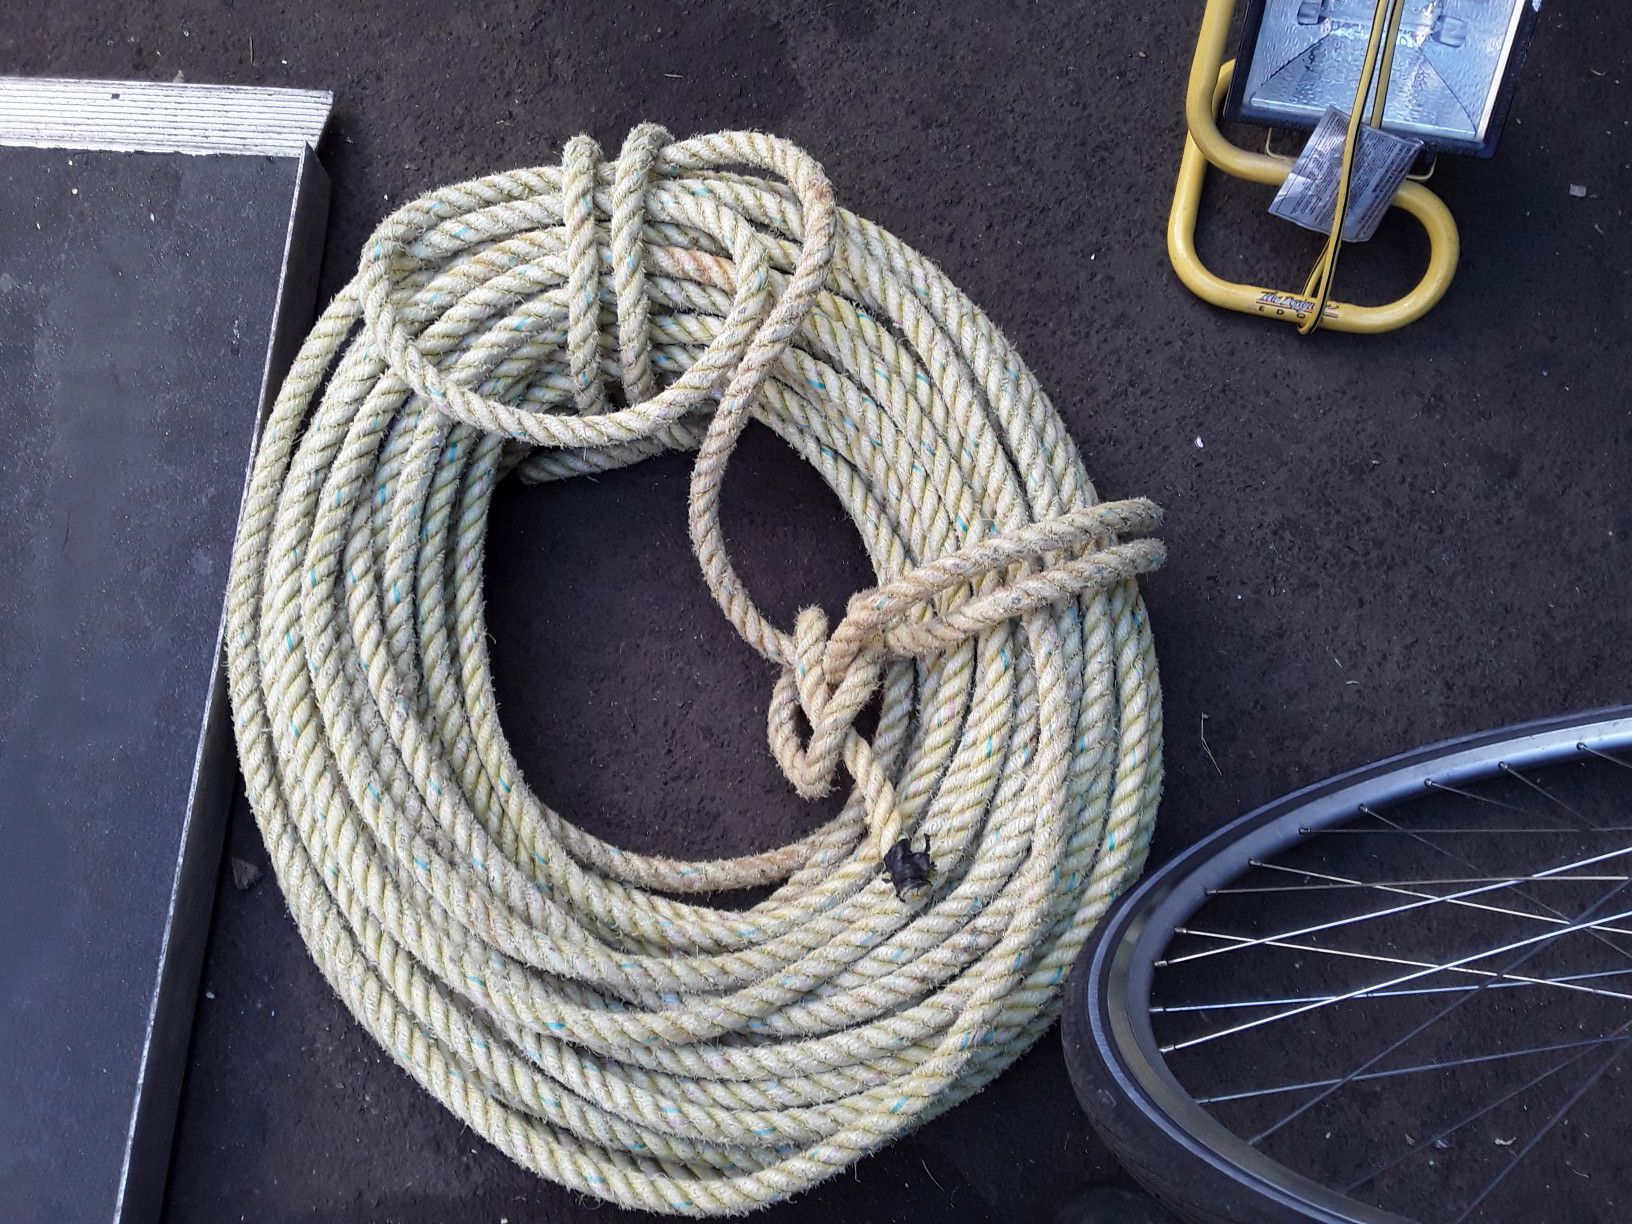 100 feet of heavy rope never used